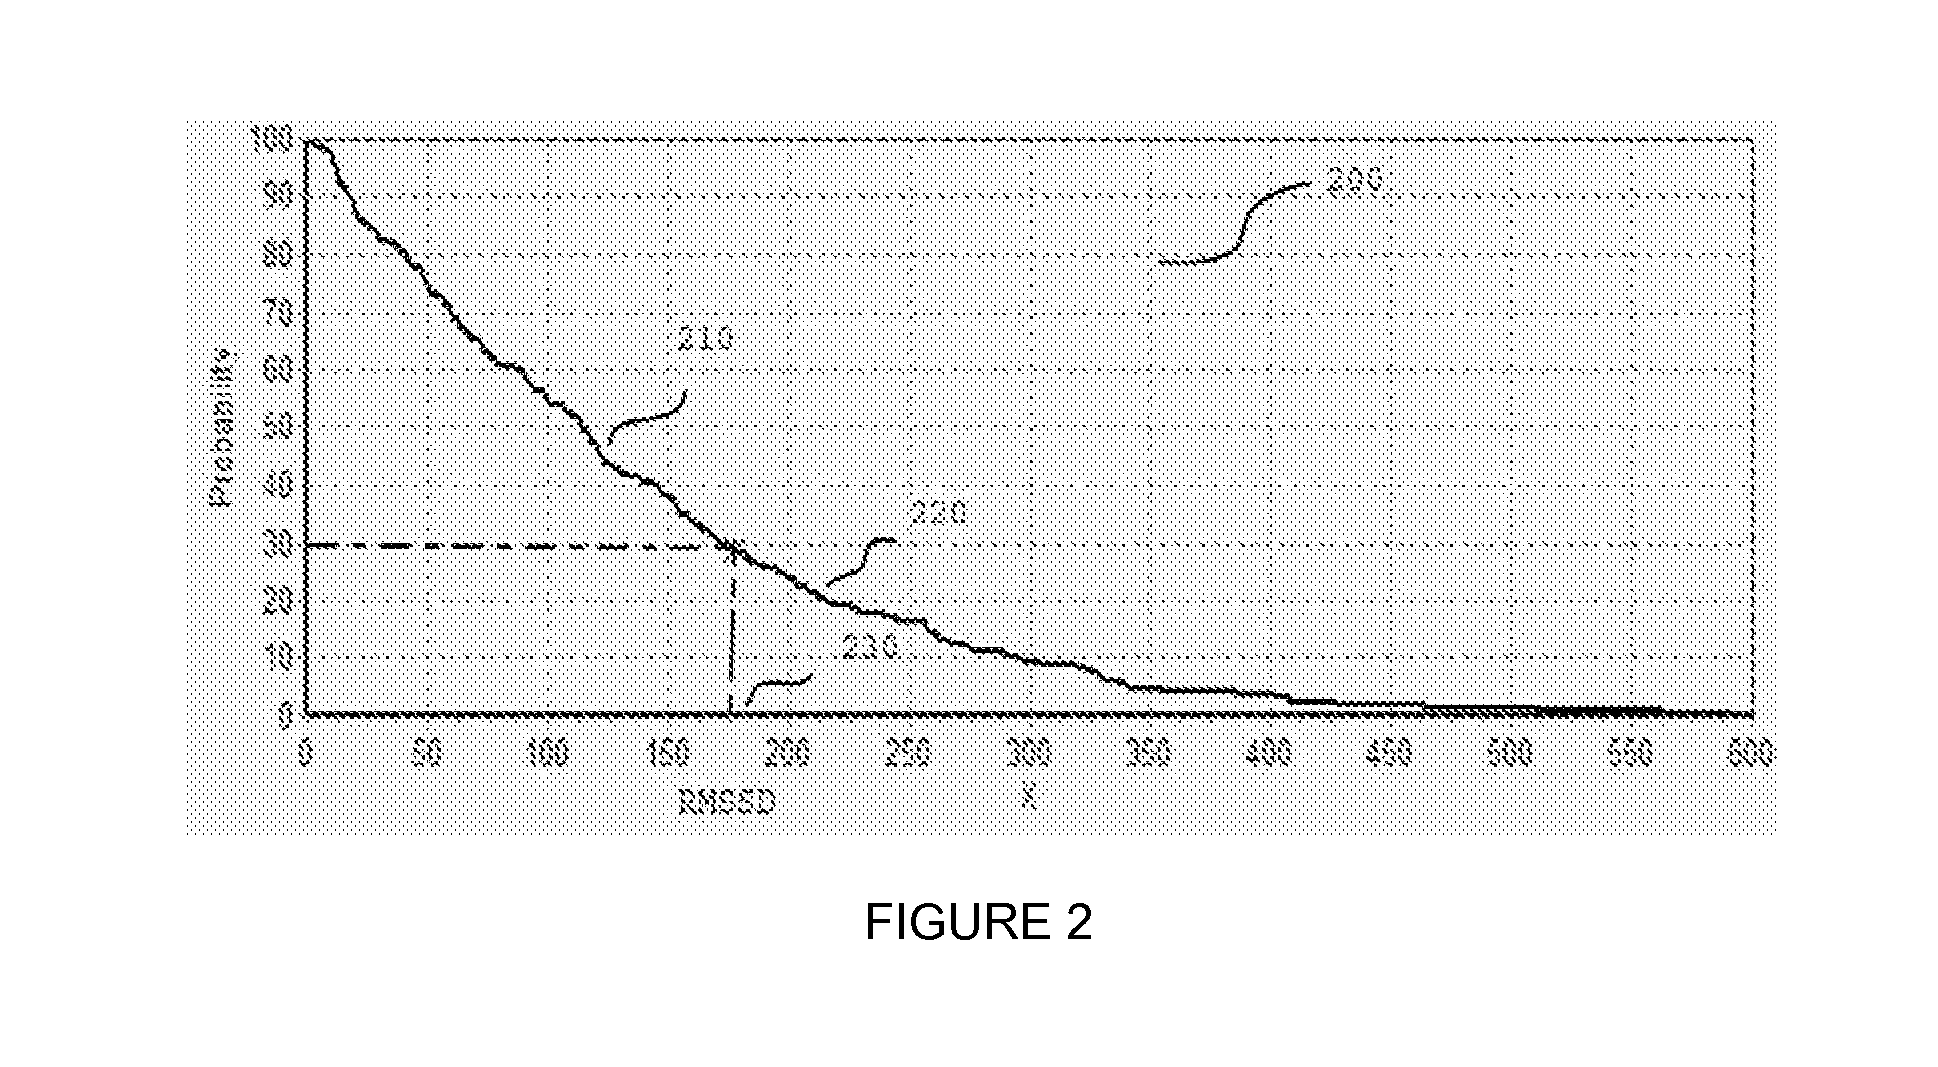 Method and system for detecting and assessing brain injuries using variability analysis of cerebral blood flow velocity